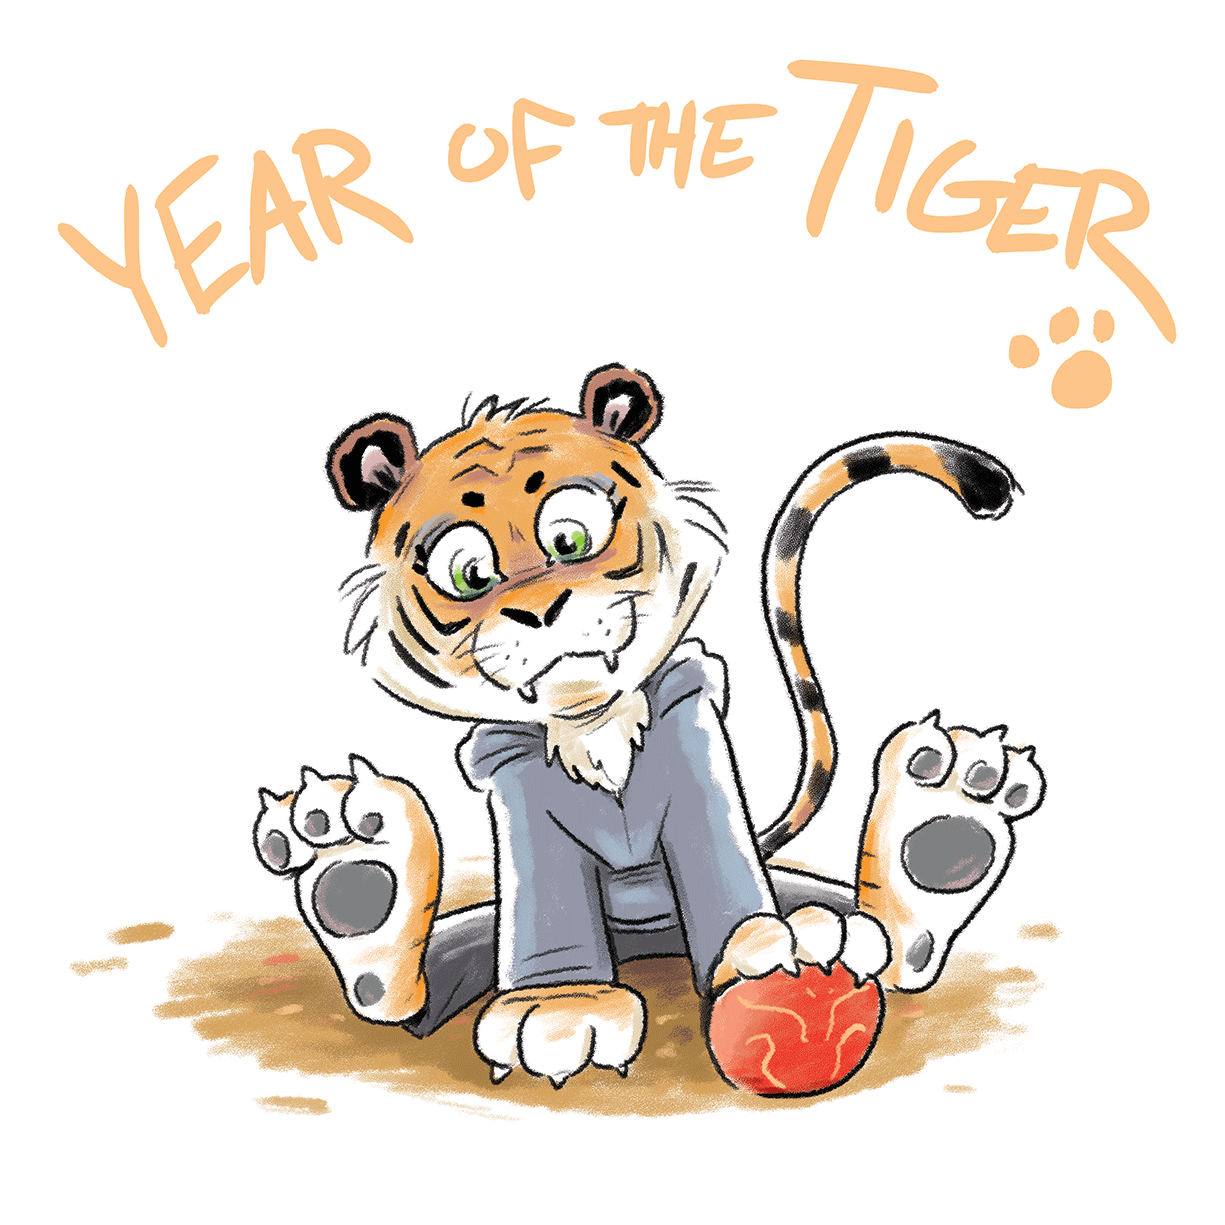 "Year of the Tiger" 2022